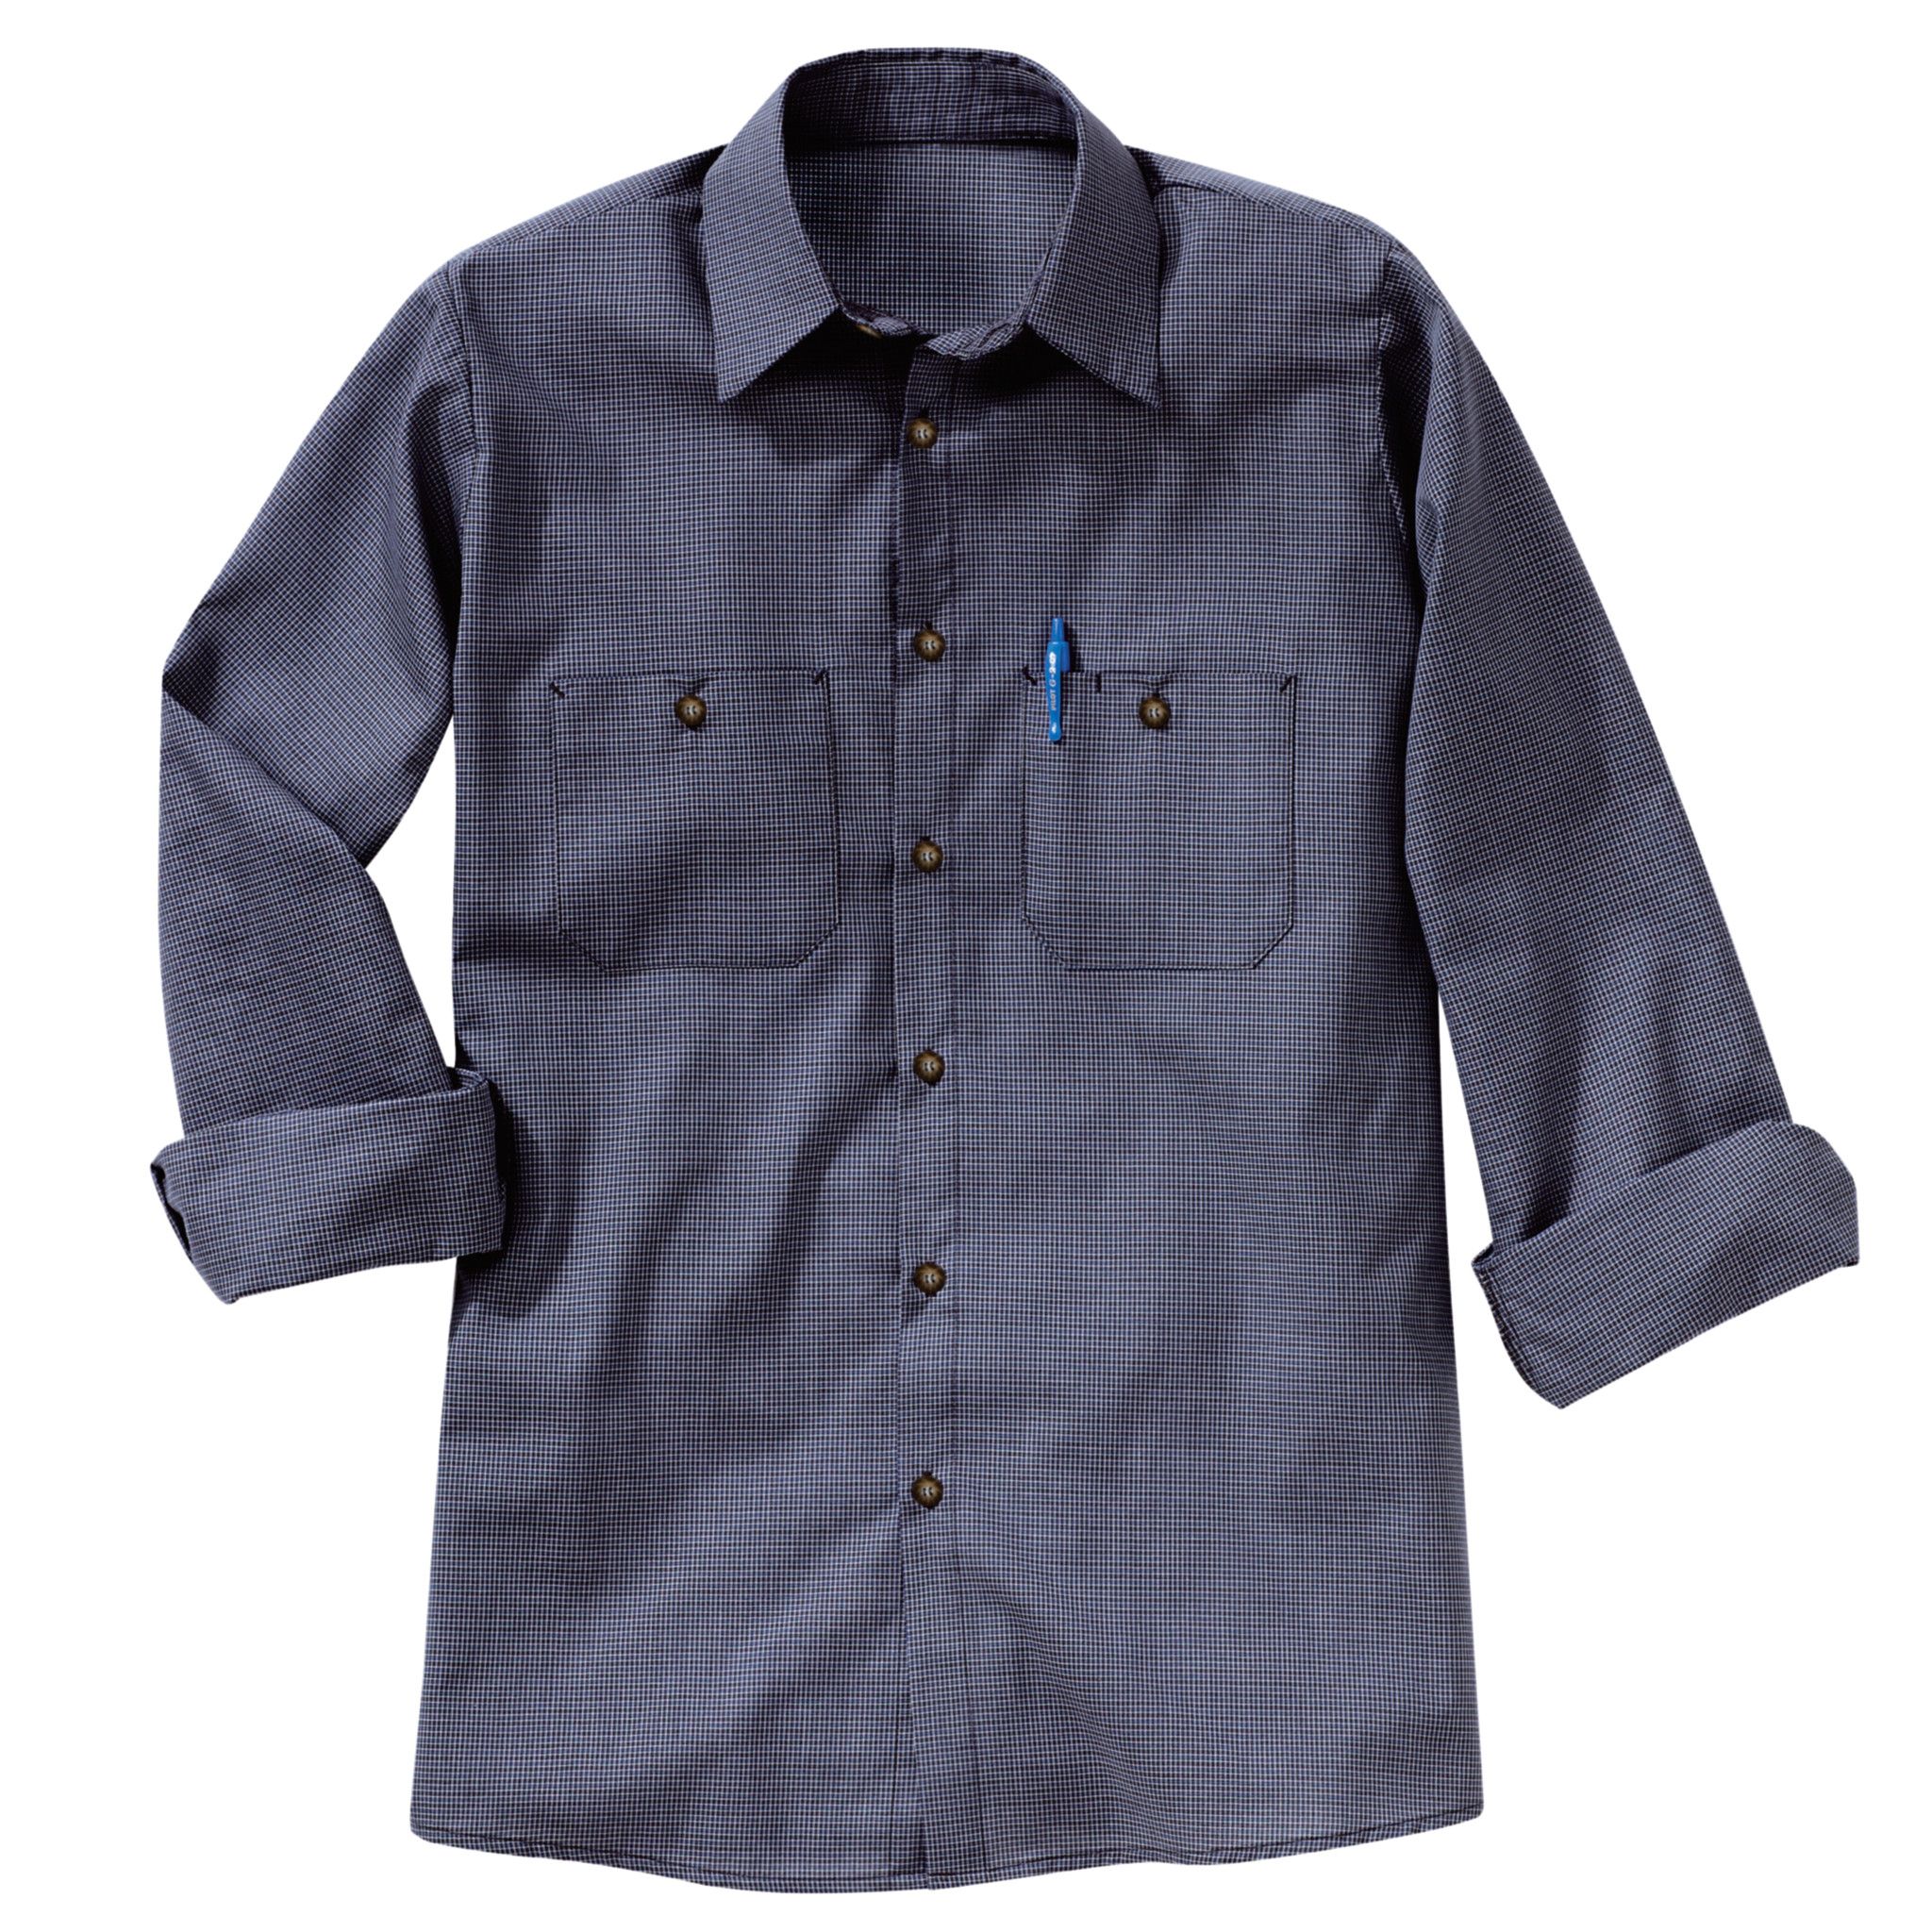 blue patterned shirt with a pen in the front pocket